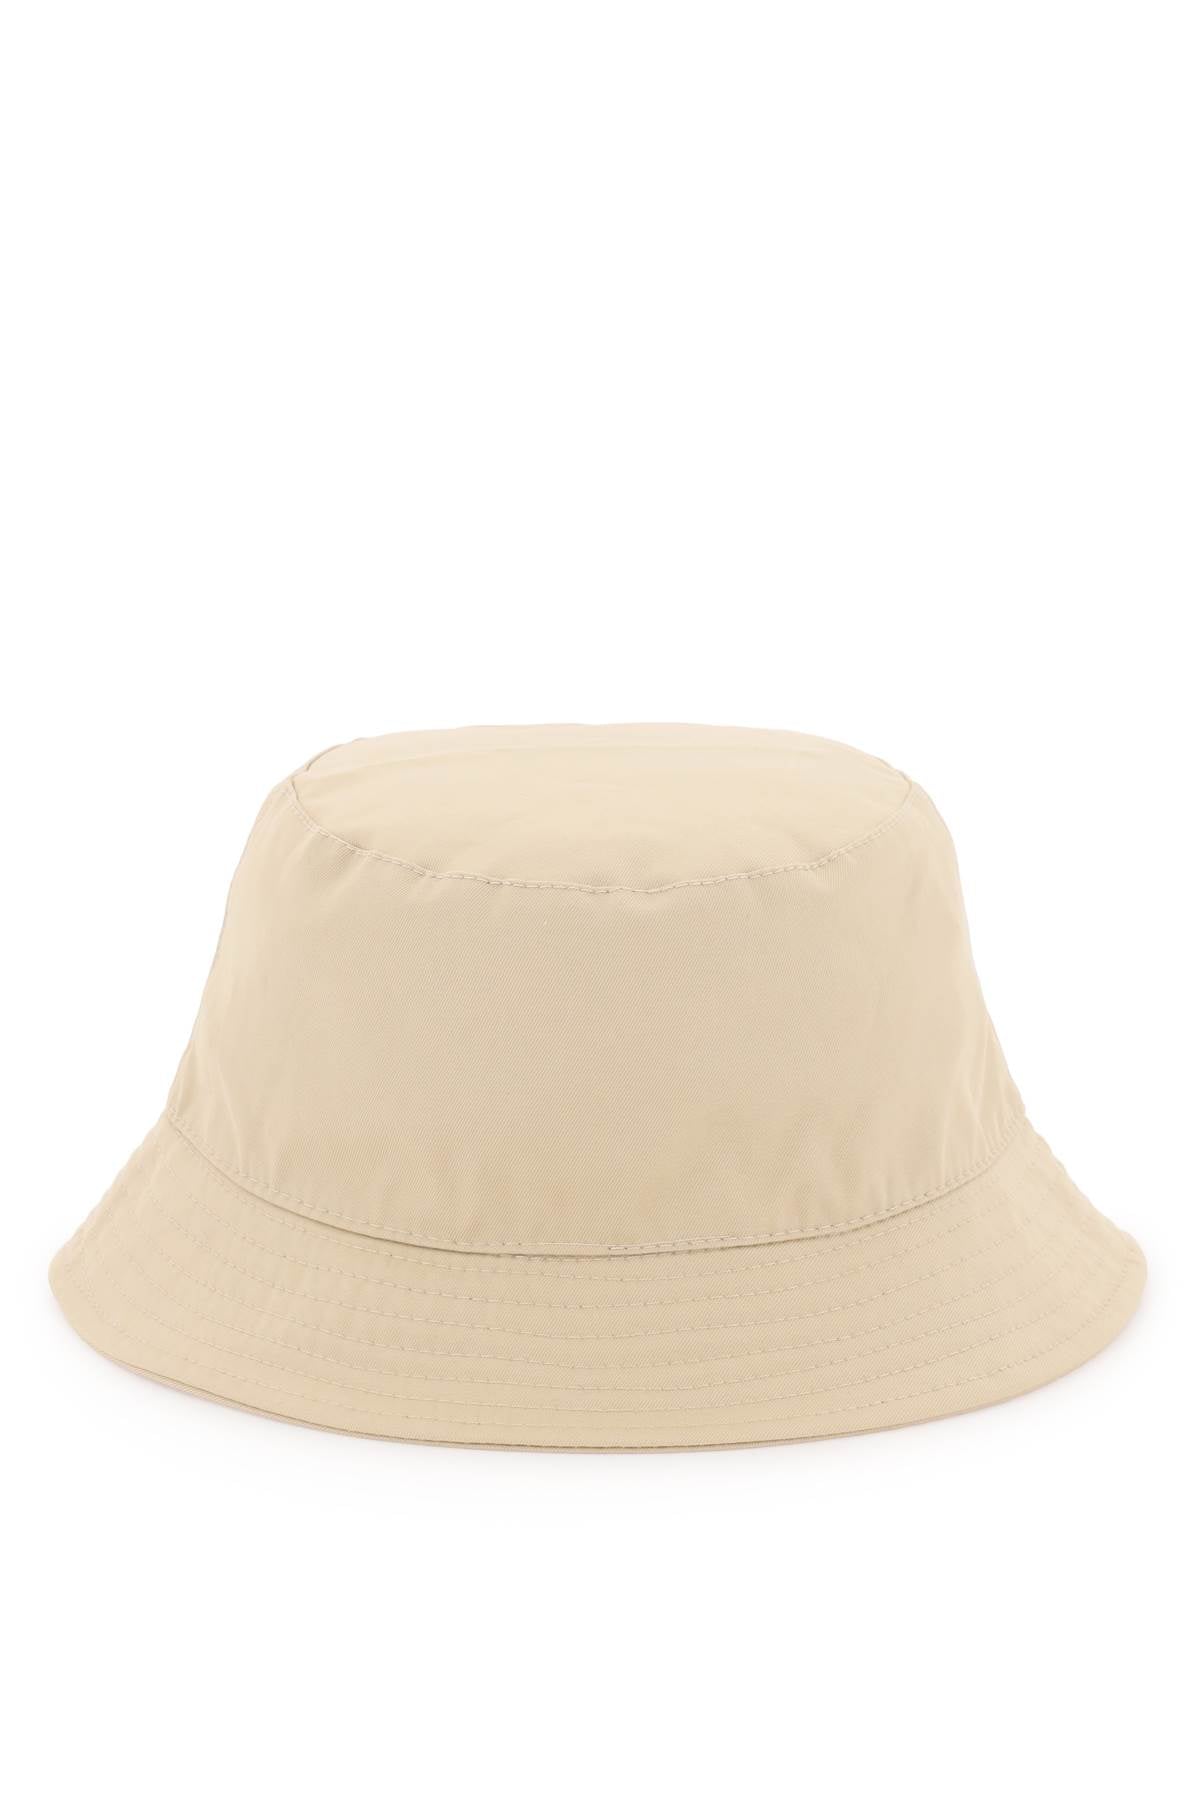 MSGM Msgm cotton bucket hat with embroidery